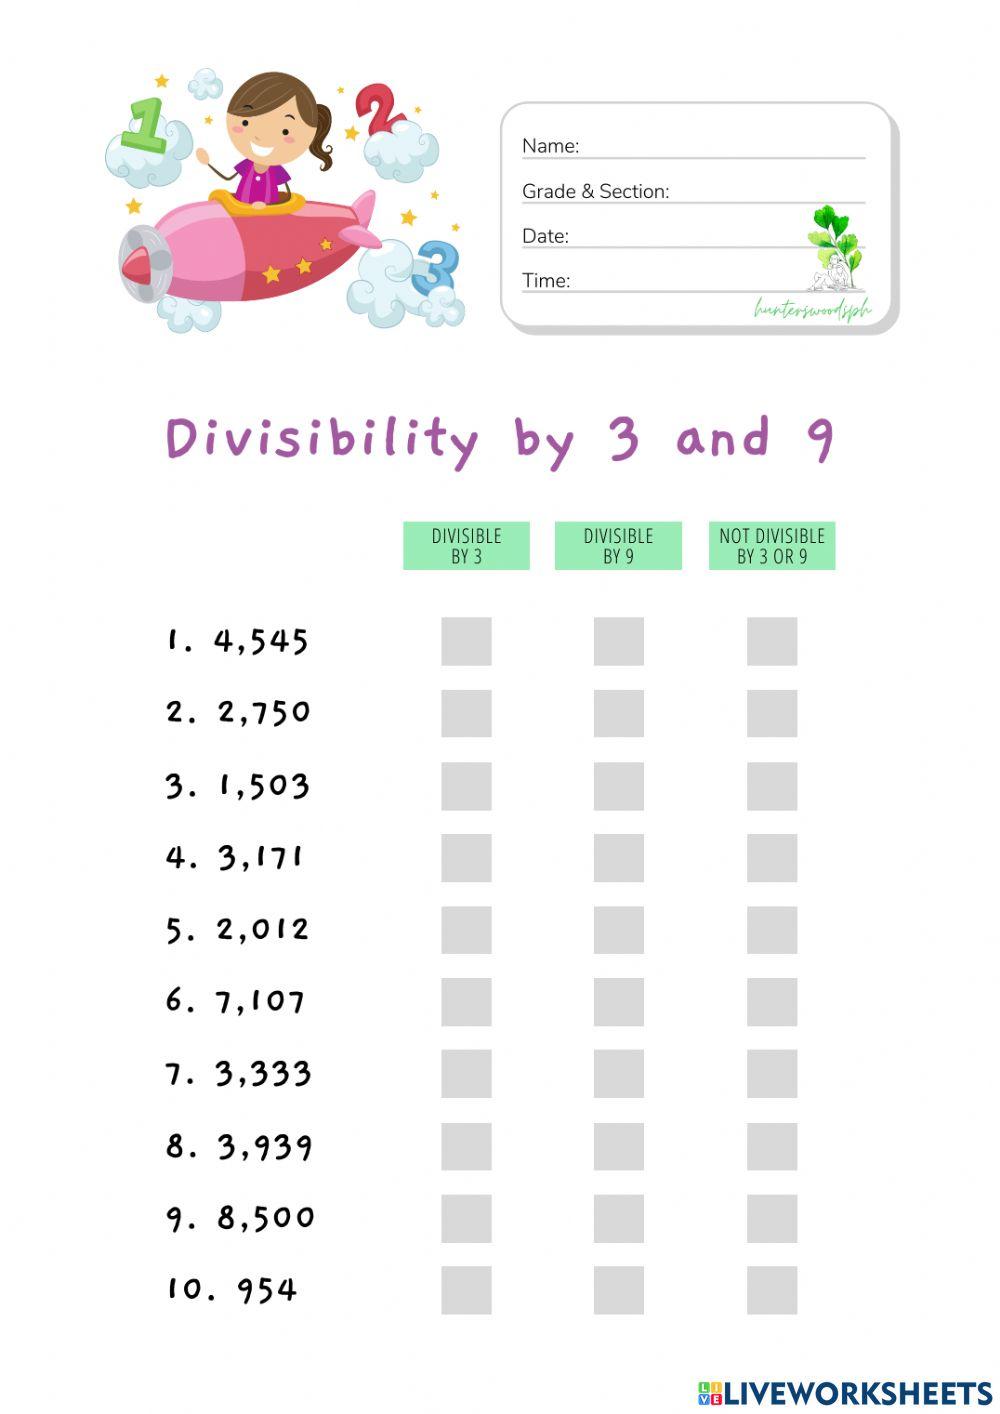 Divisibility by 3 and 9 (HuntersWoodsPH Math)